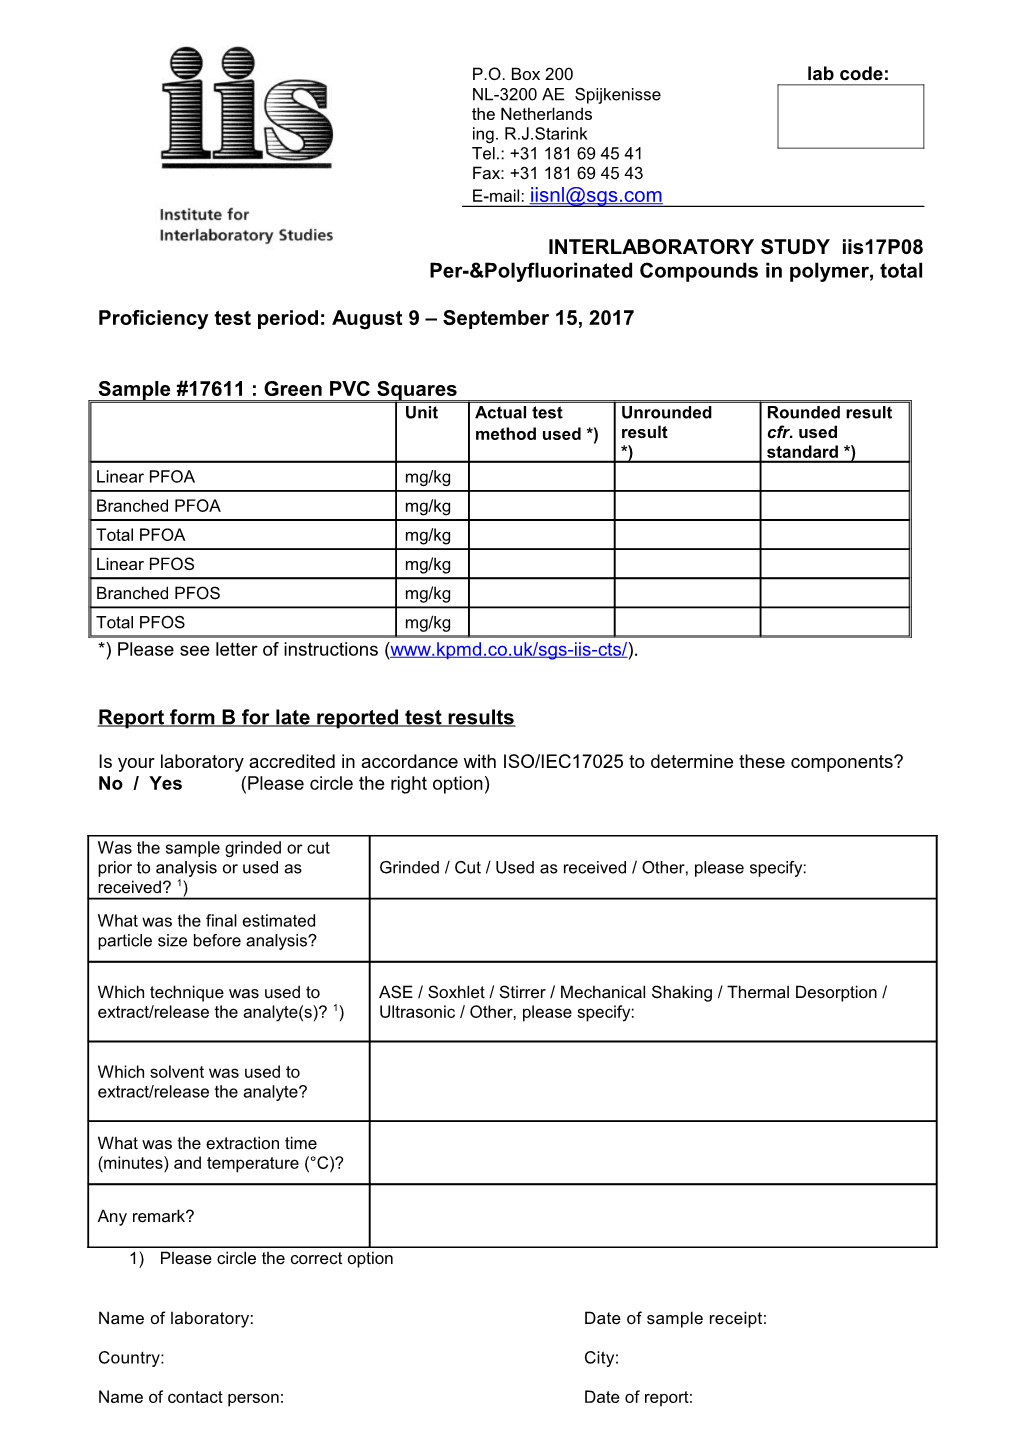 Report Form a for Late Reported Test Results